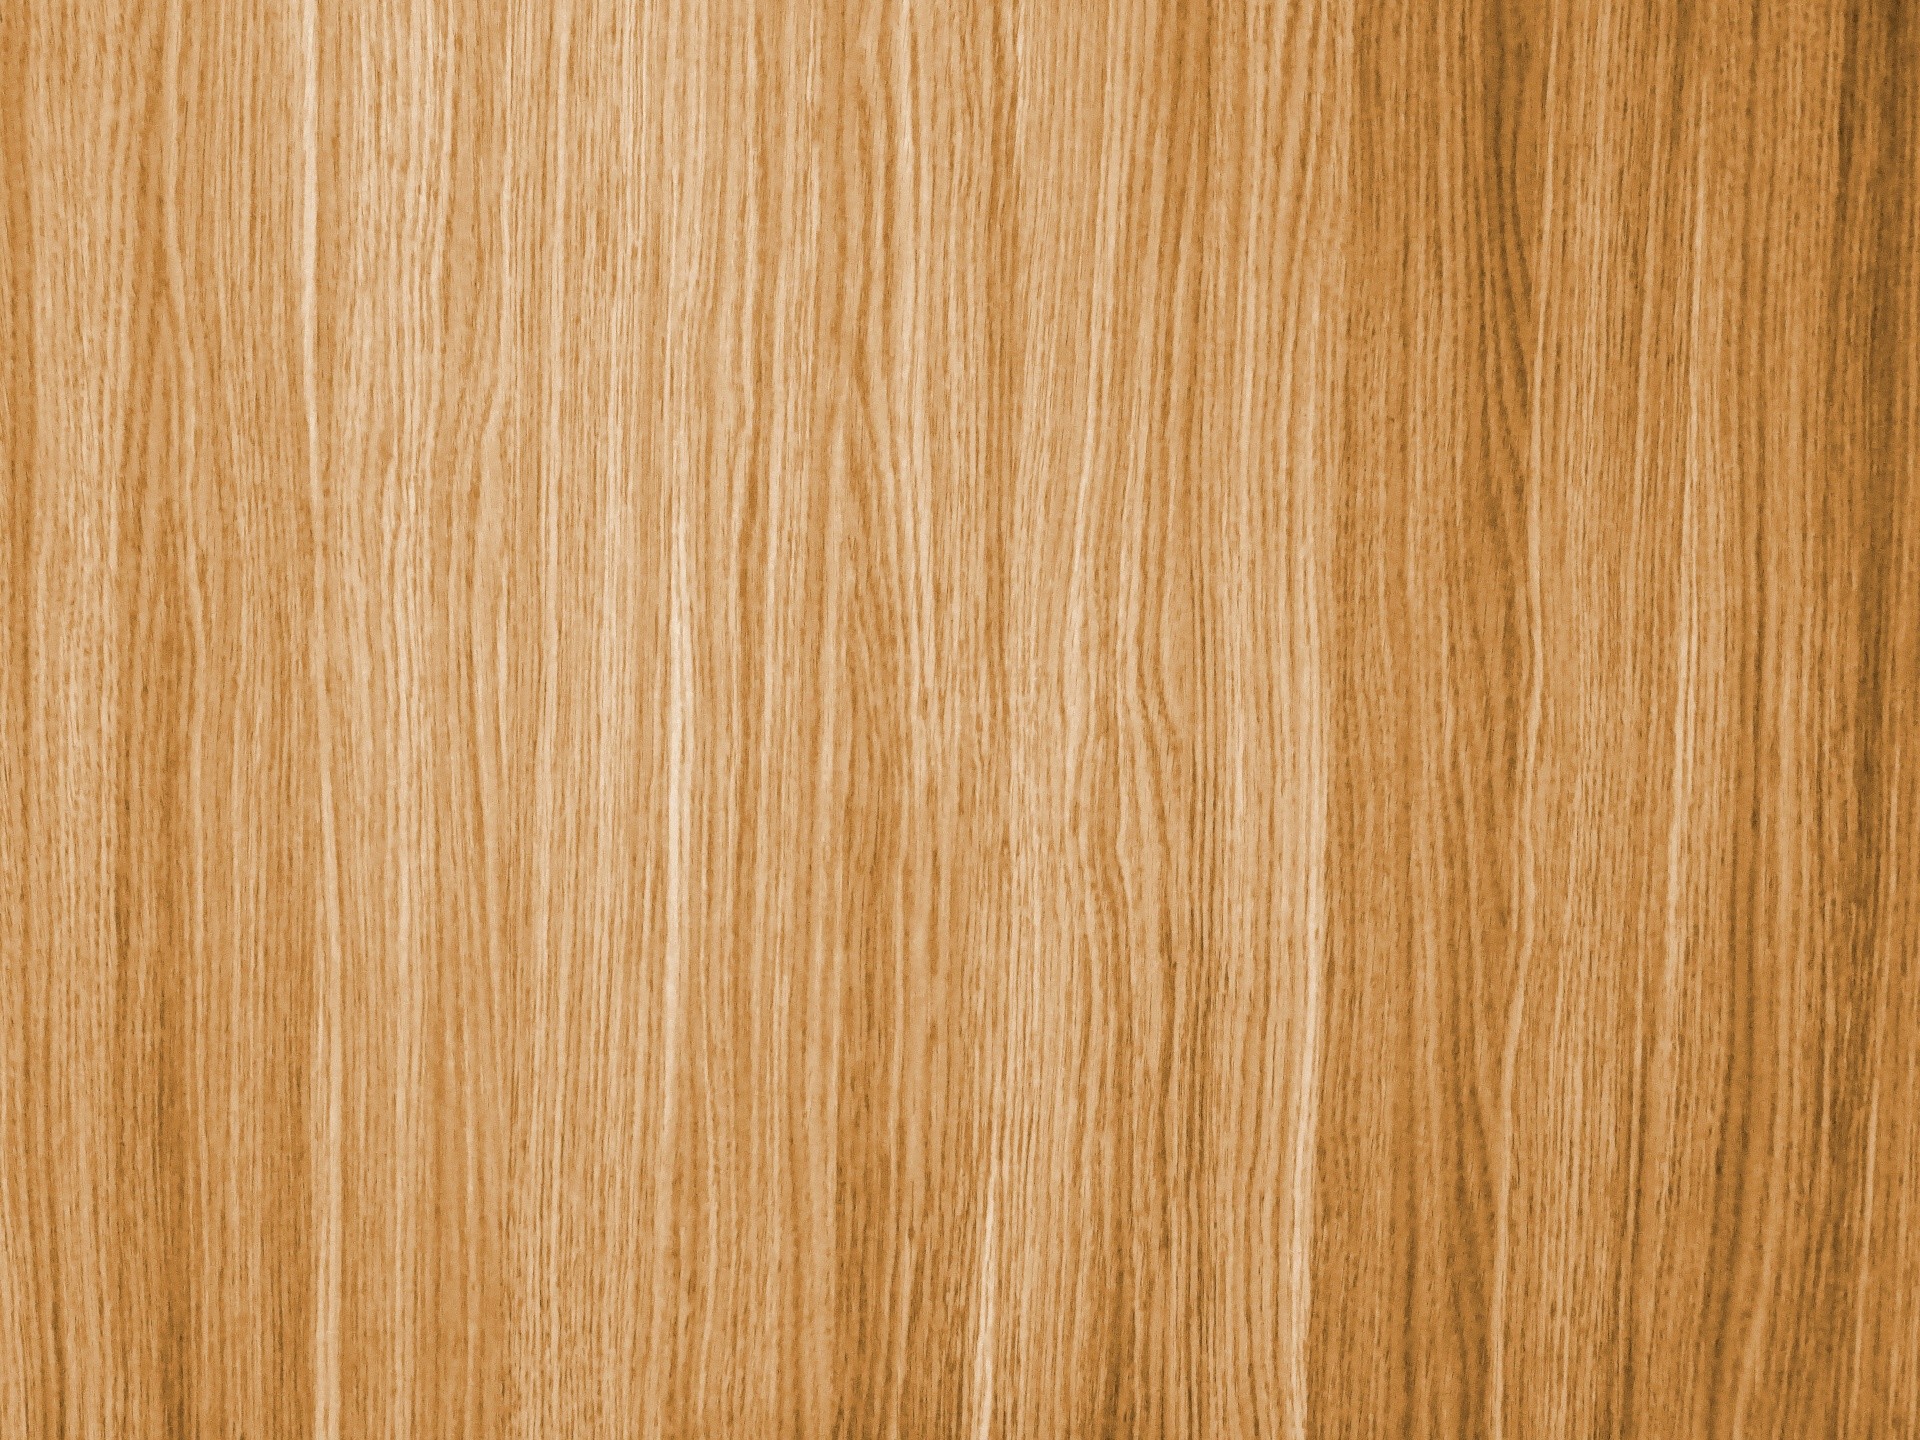 1920x1440 Natural Wood Grain Background